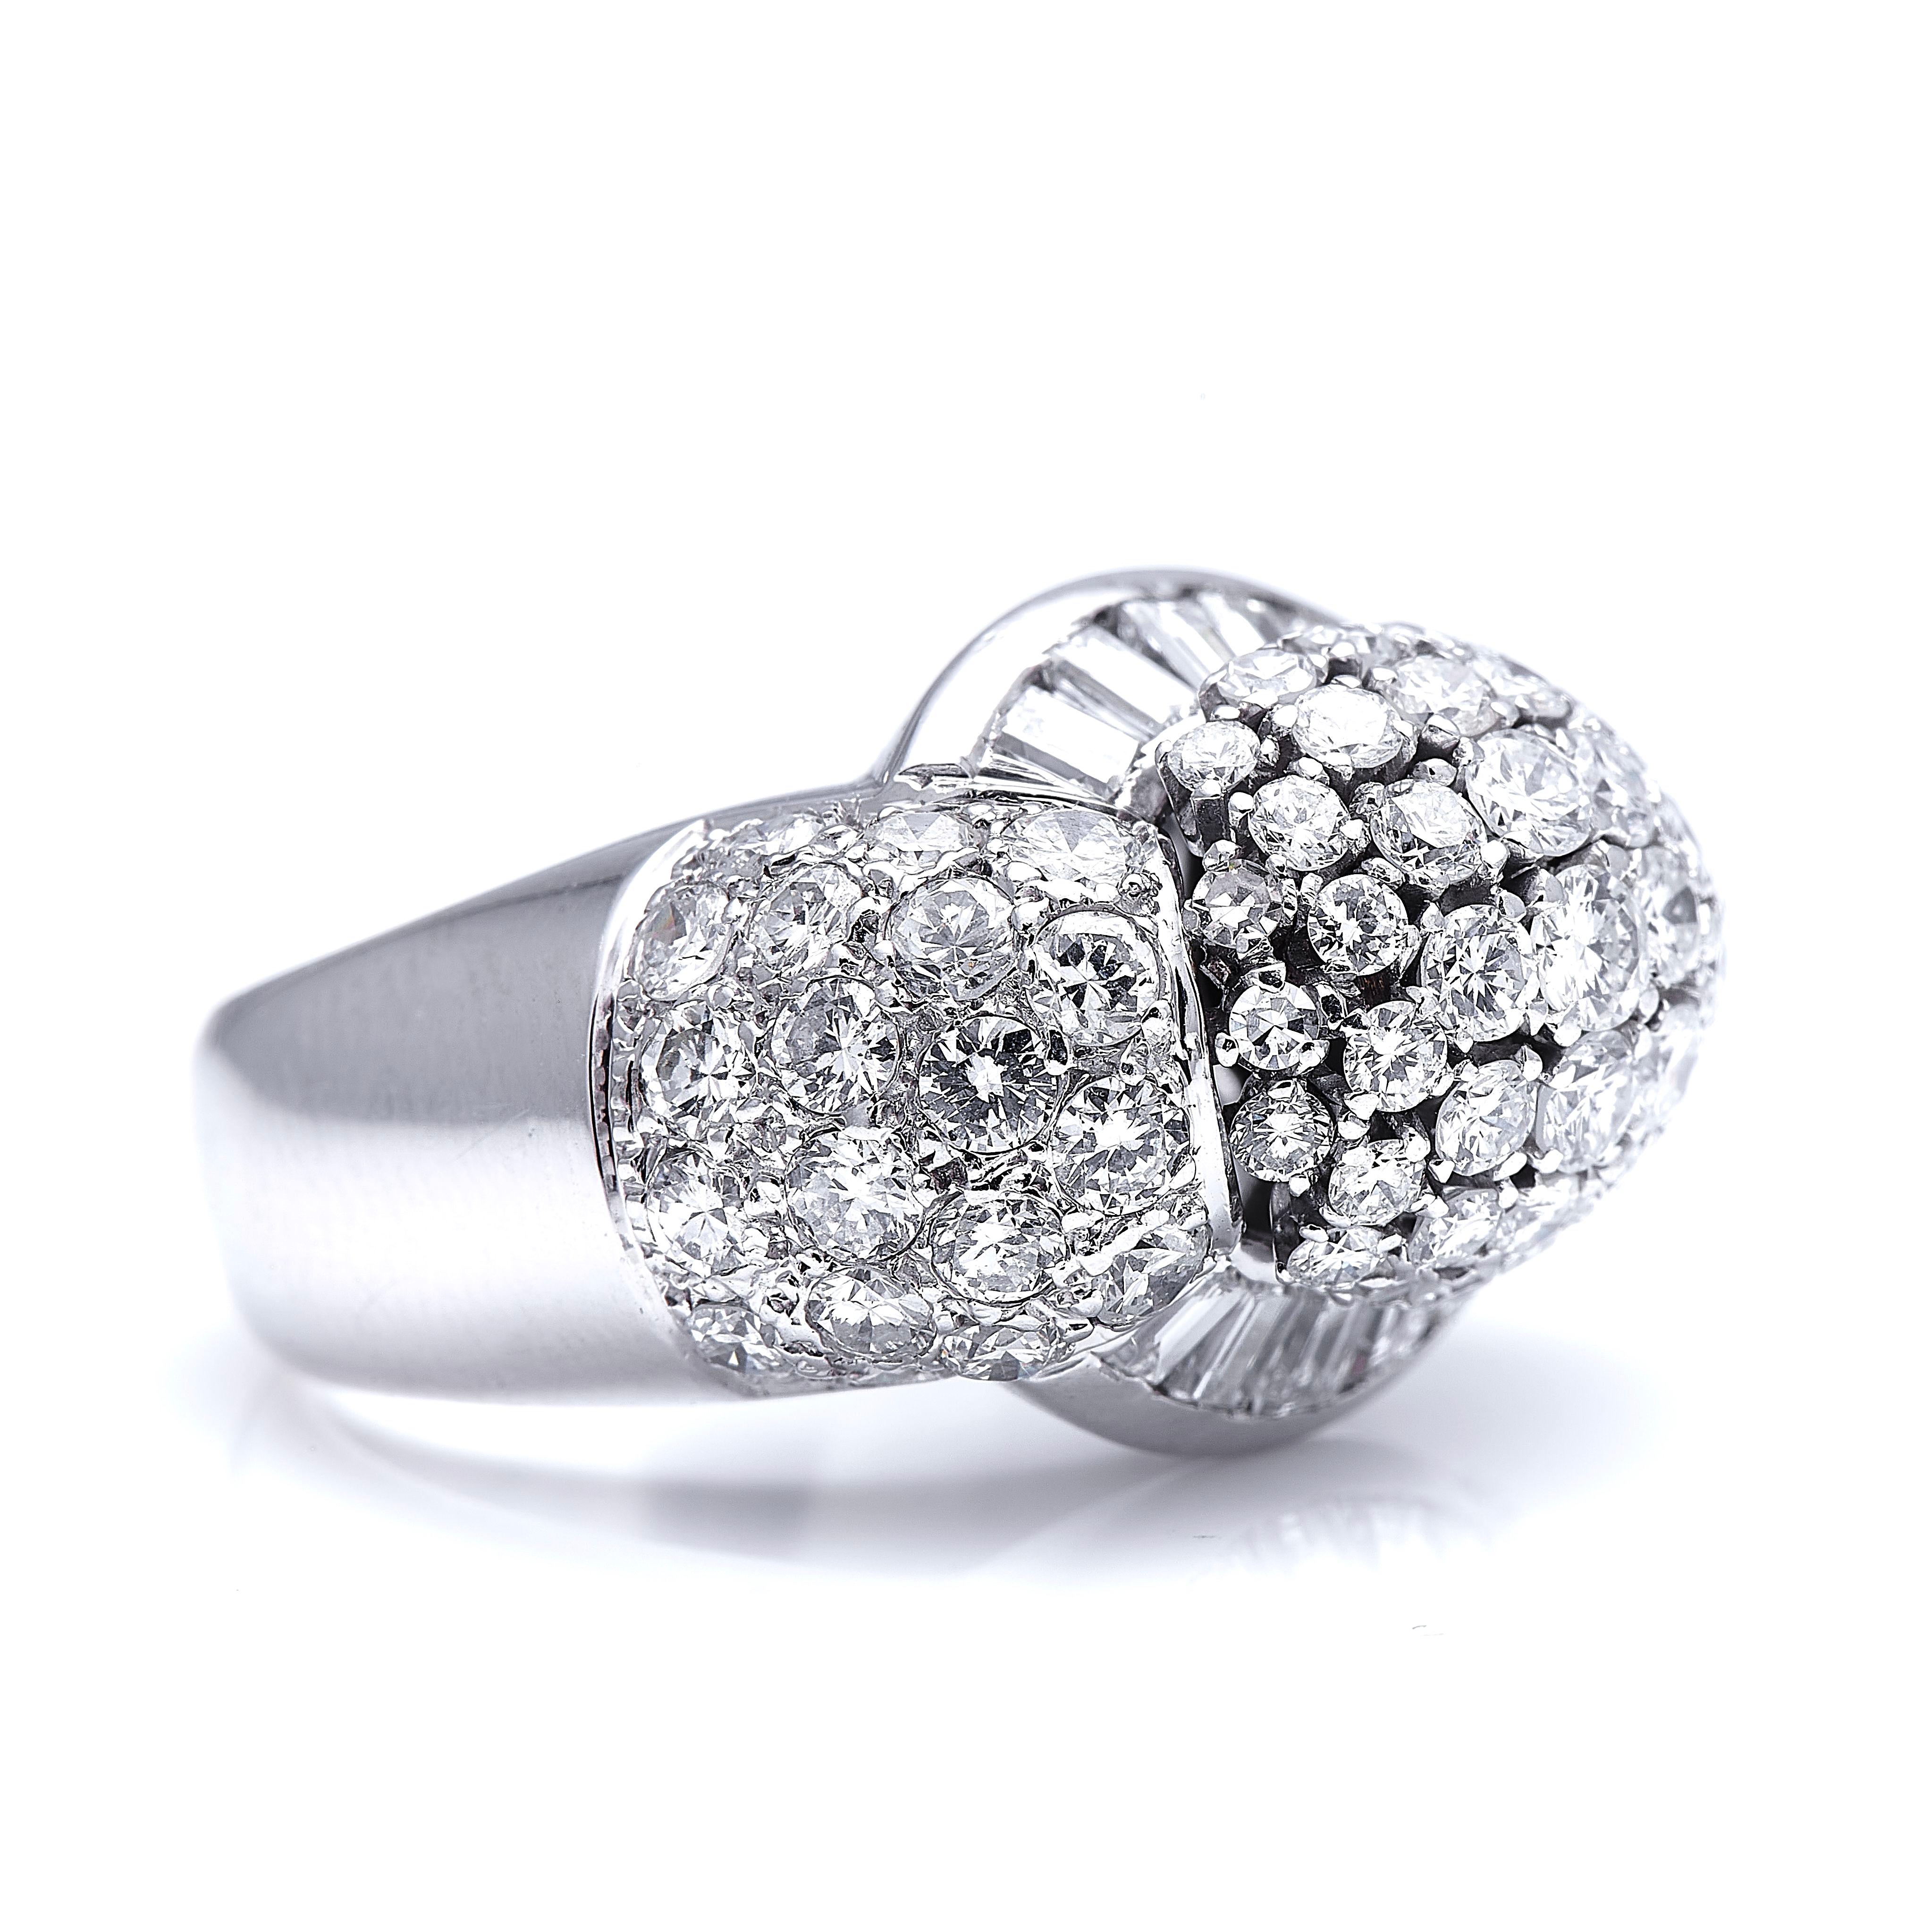 Vintage, large diamond bombe cocktail ring, circa 1950. Set with approximately 4 carats of bright white diamonds, this is a fantastic statement ring. The high dome centre and boasting shoulders are set with a pave of bright round-cut diamonds with